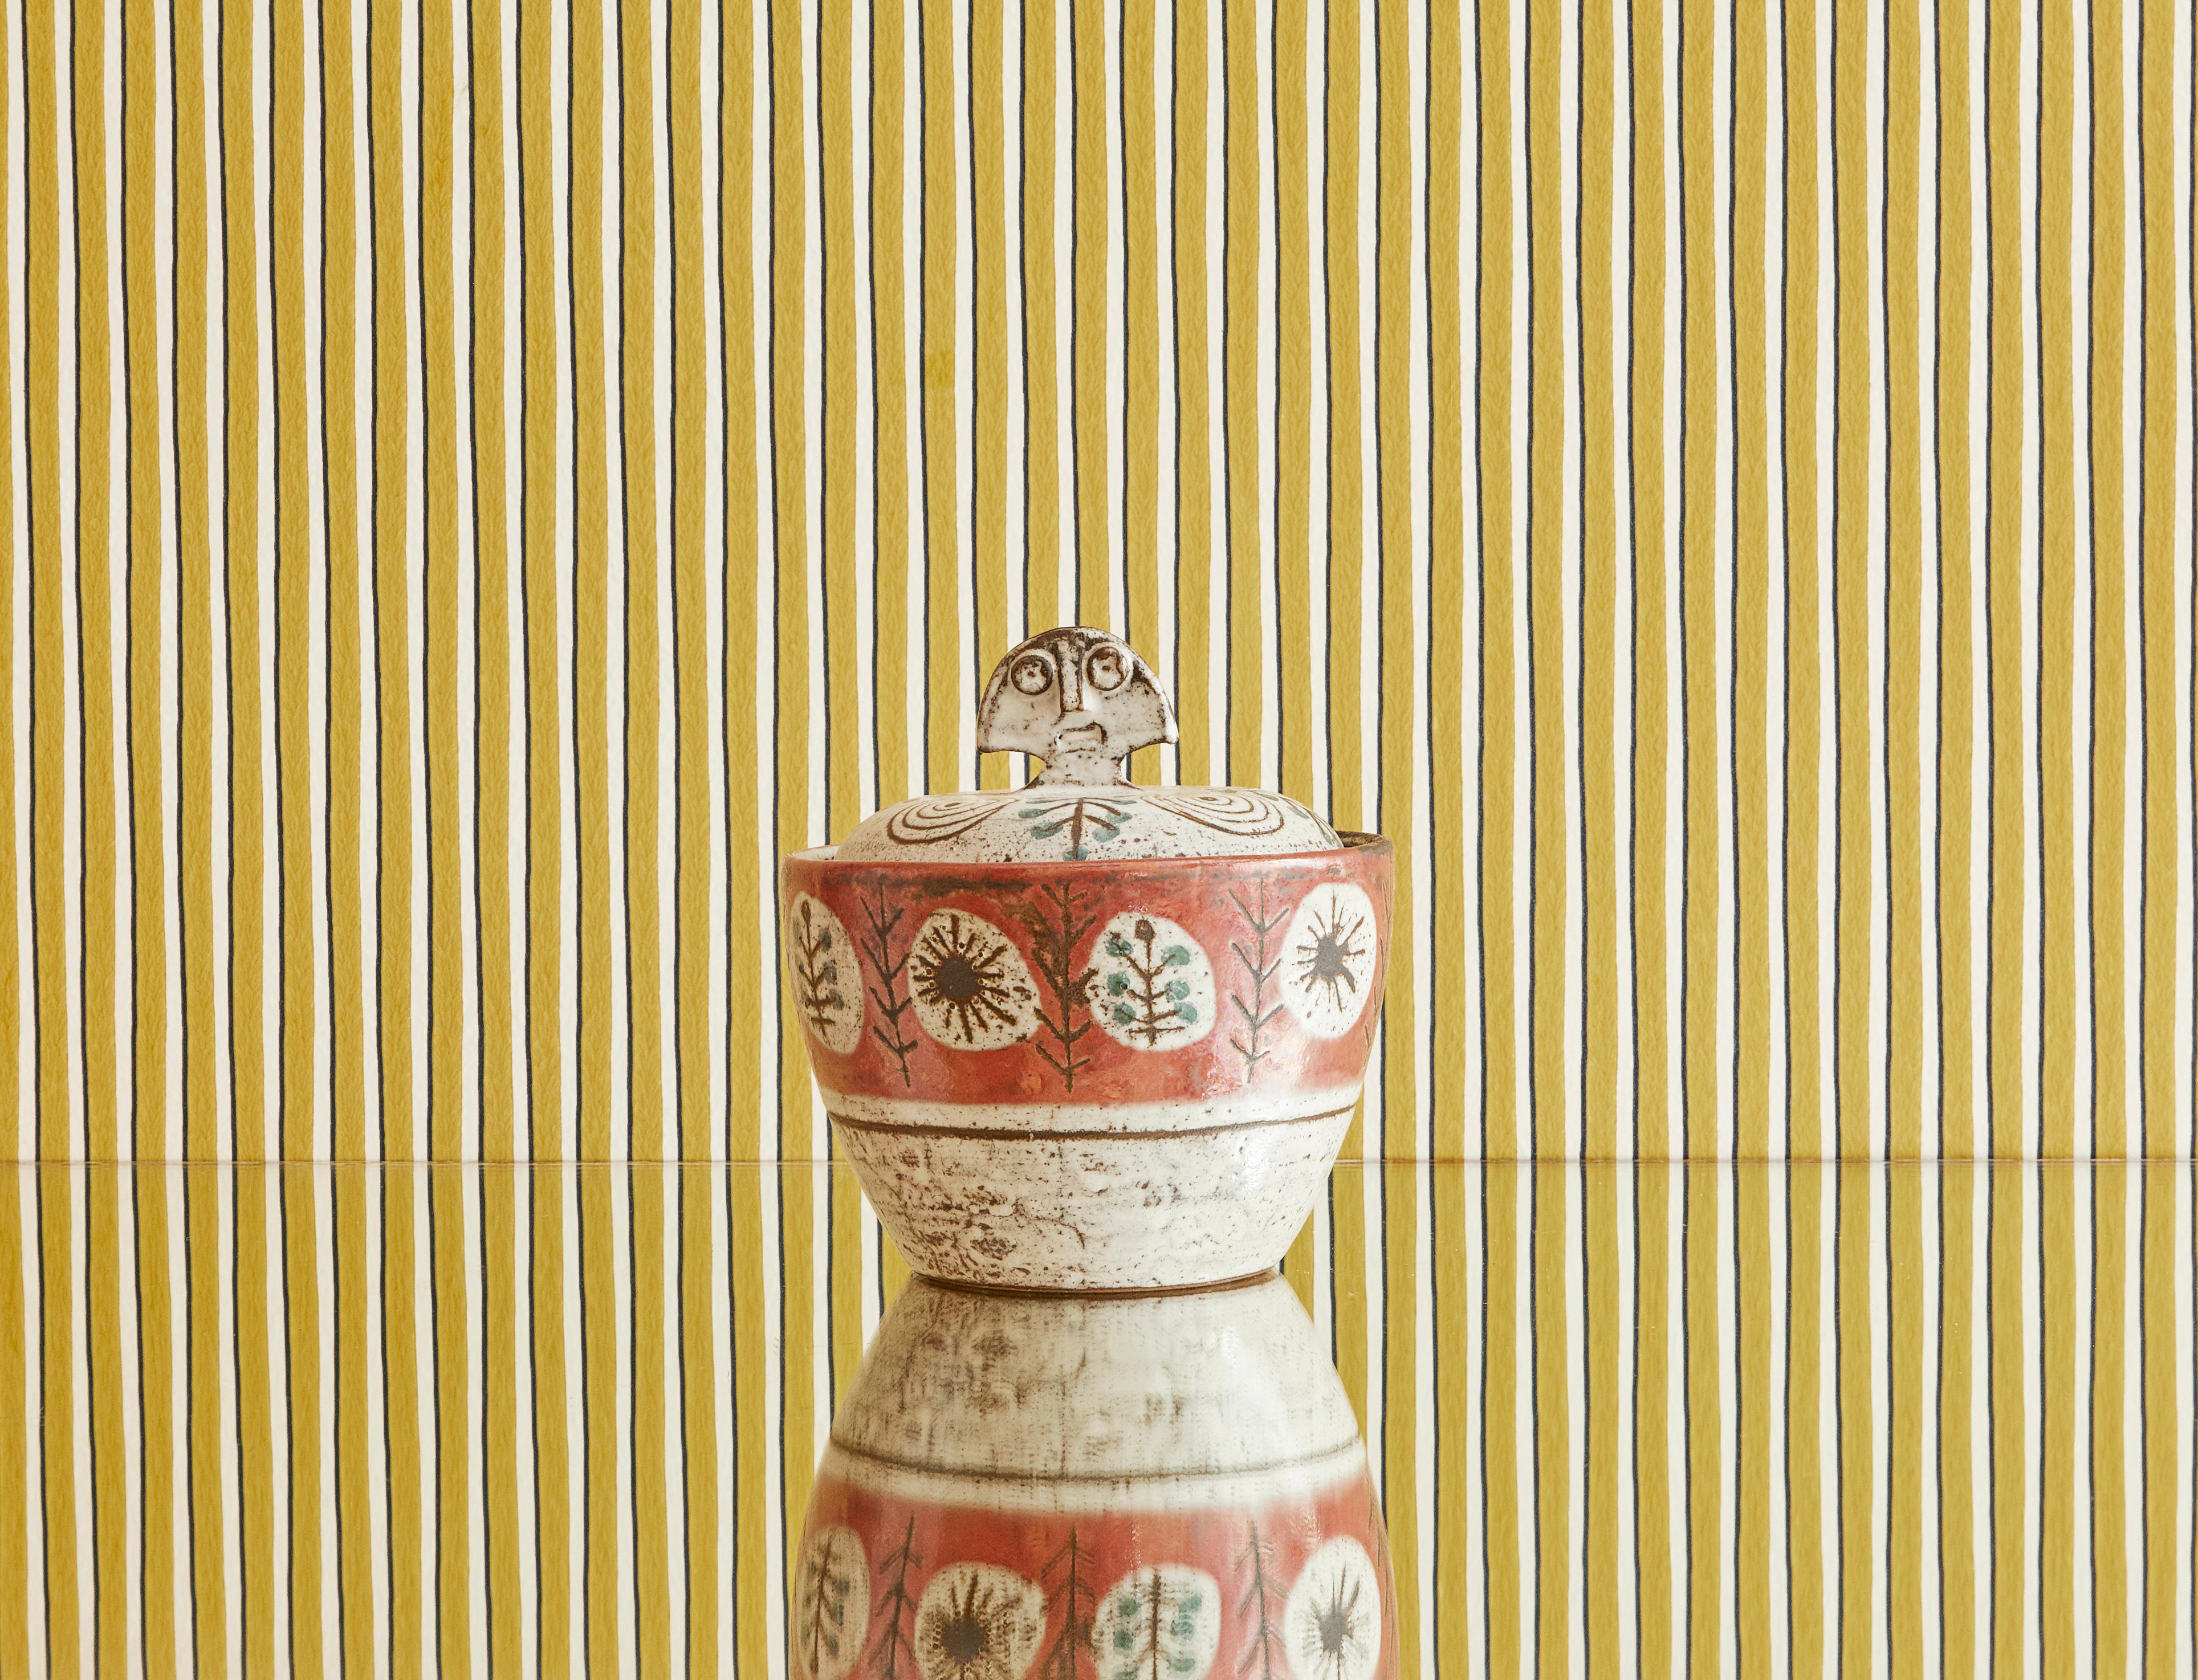 Lovely 1950s ceramic lidded jar with beautiful details by Gustave Reynaud.